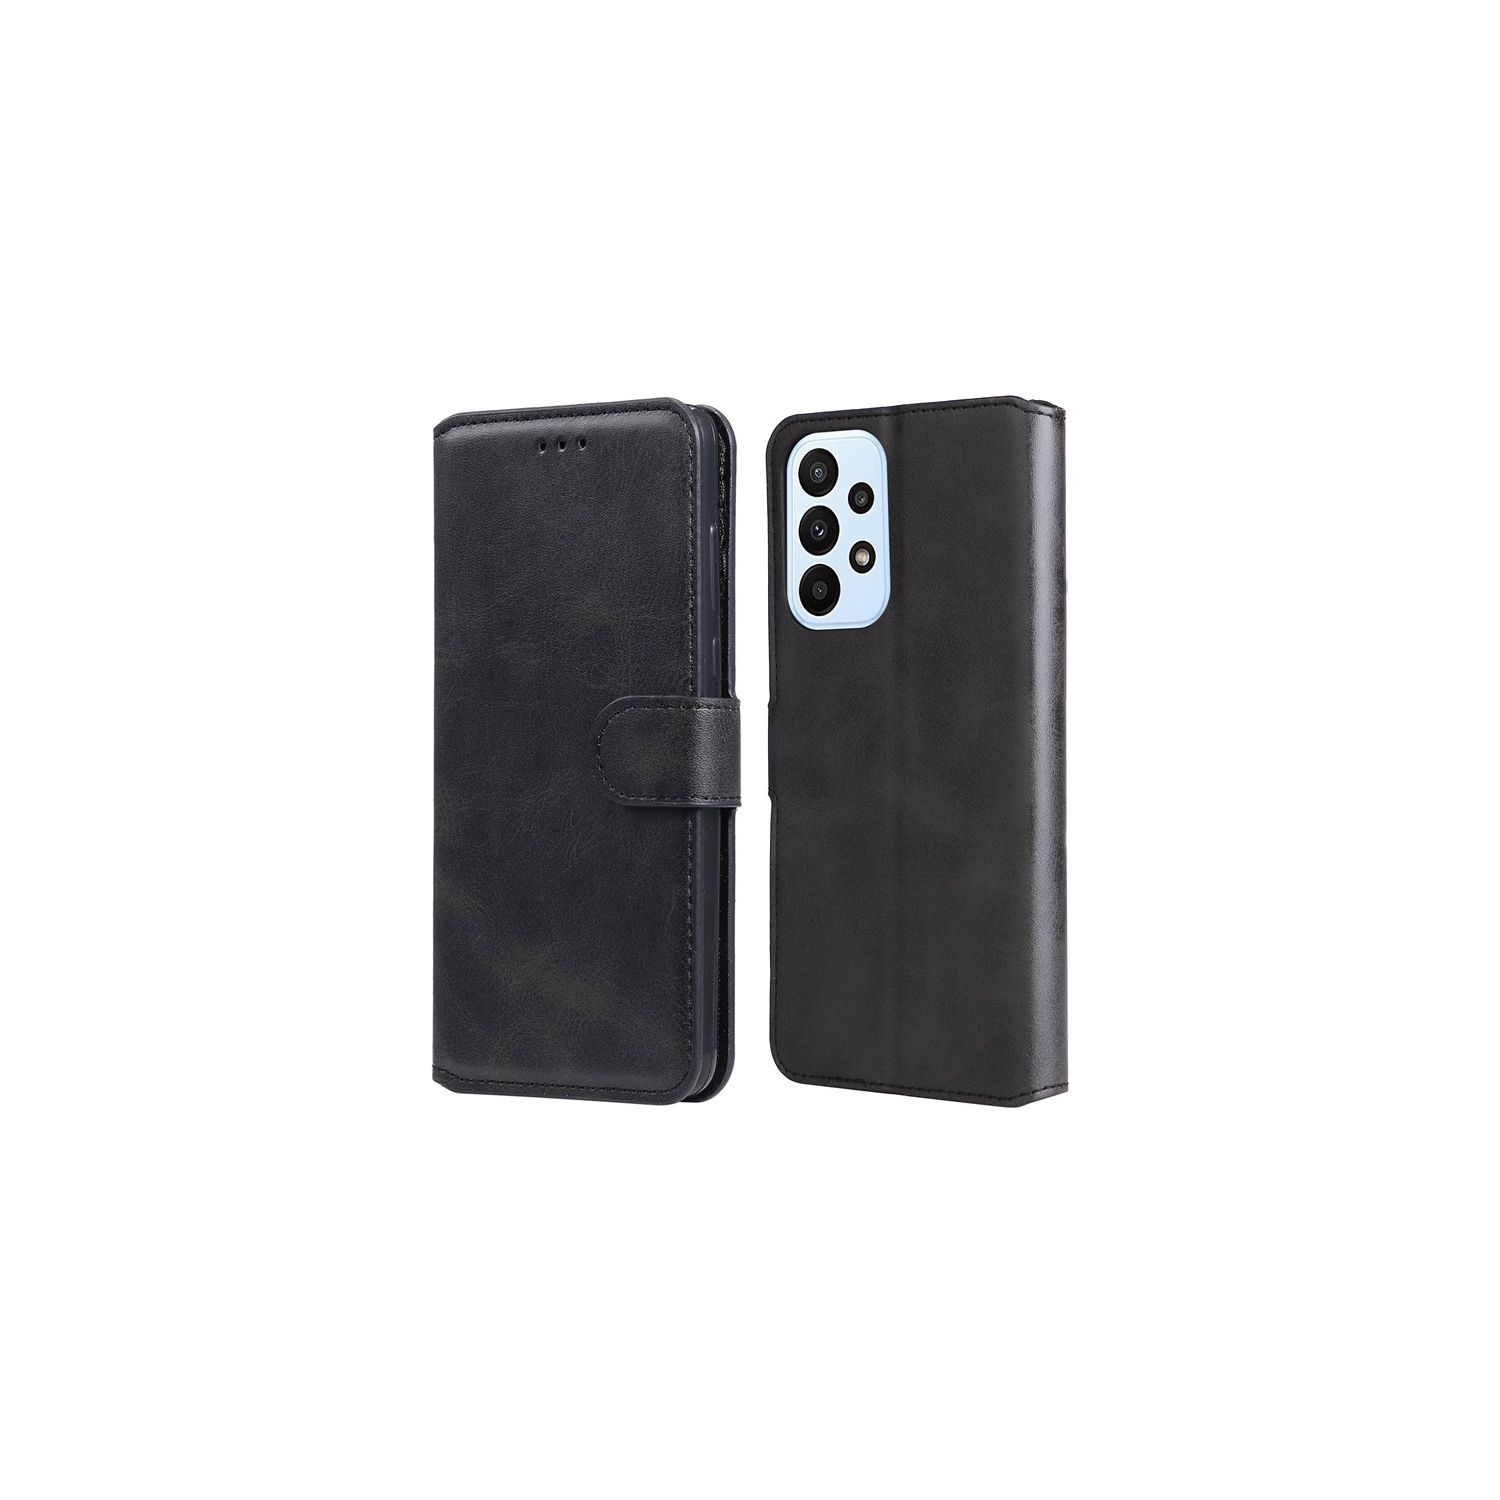 [CS] Samsung Galaxy A73 5G (2022) Case, Magnetic Leather Folio Wallet Flip Case Cover with Card Slot, Black